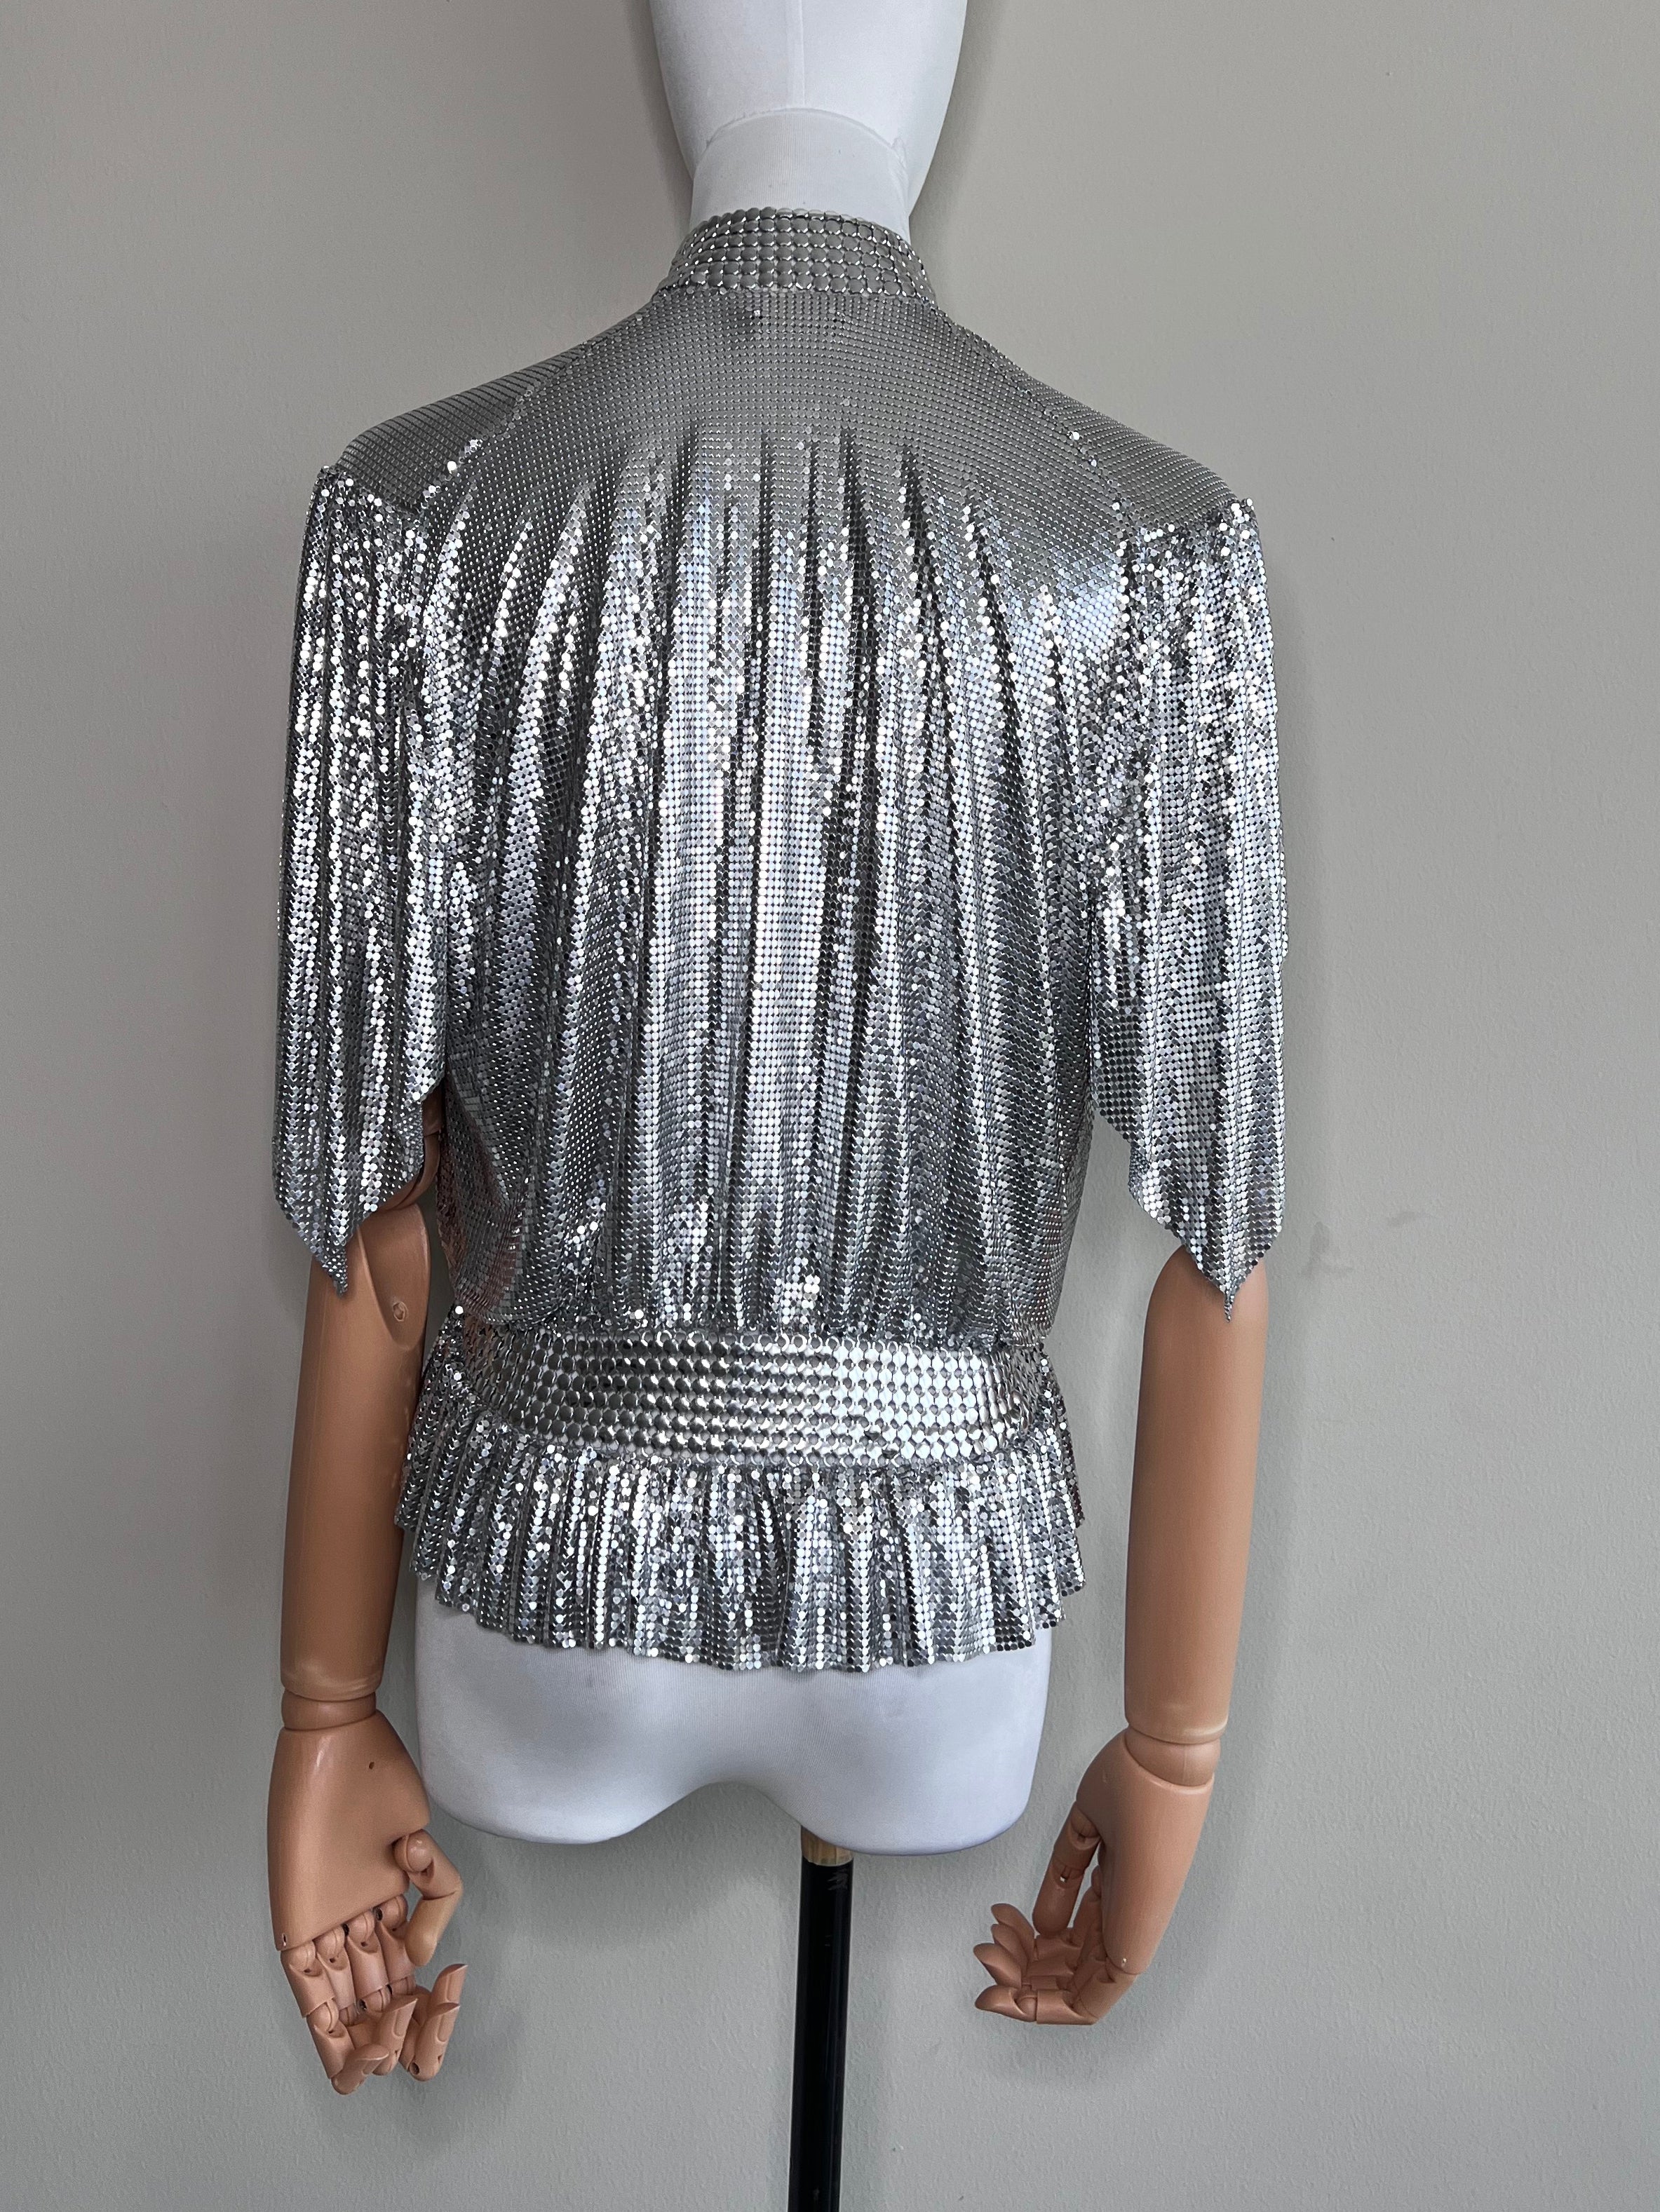 Silver chainmail crop top - PACO RABANNE